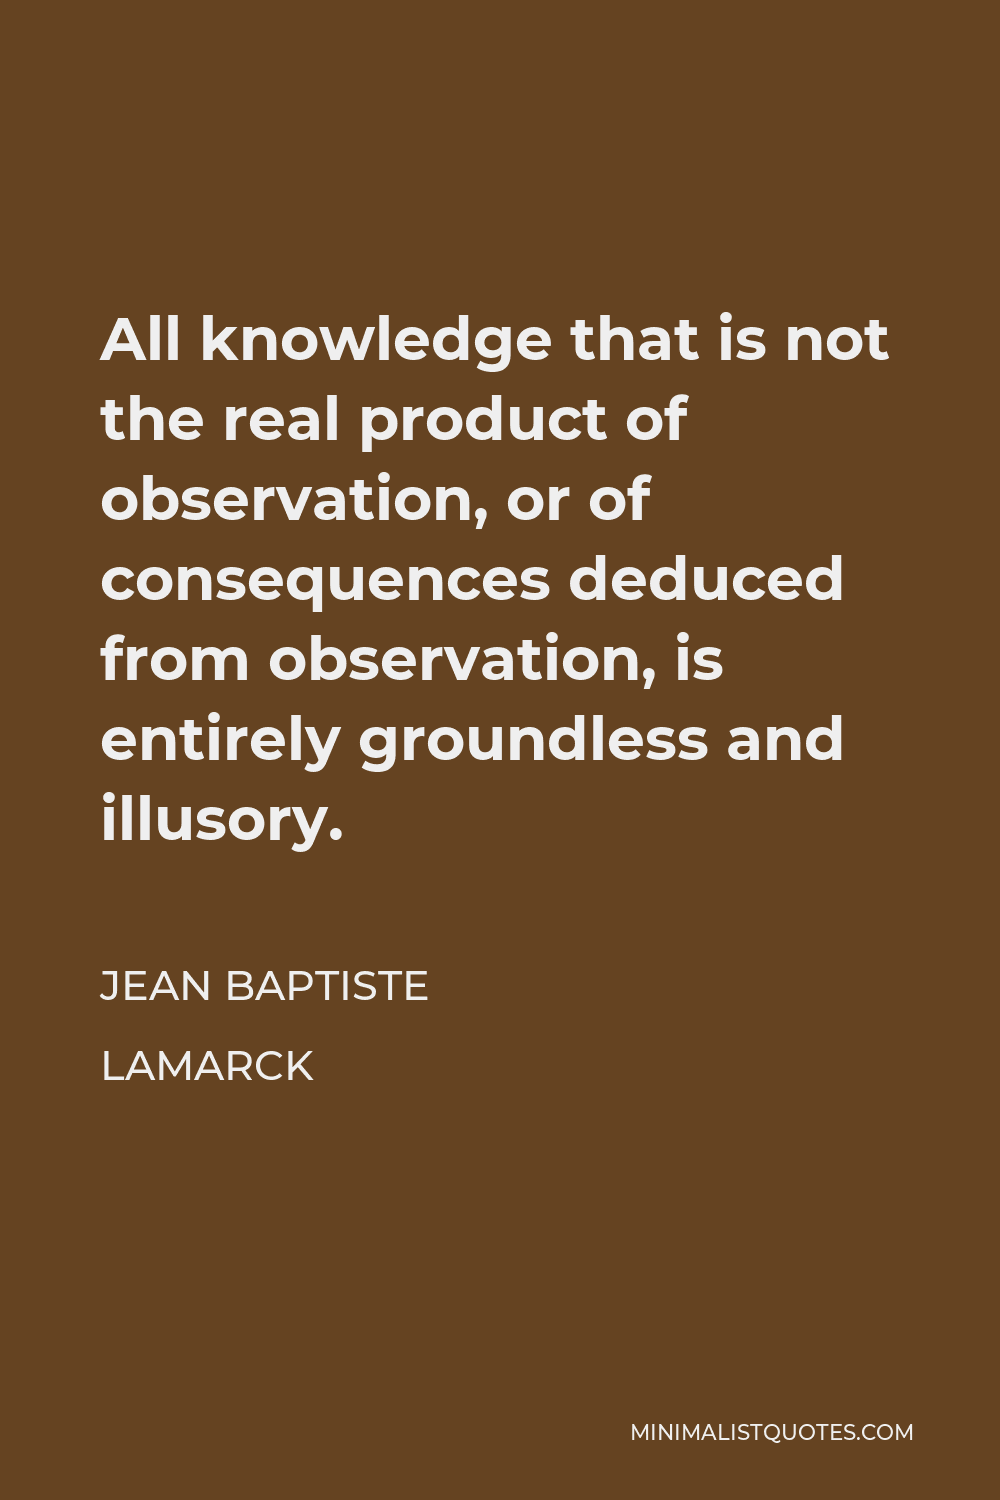 Jean Baptiste Lamarck Quote - All knowledge that is not the real product of observation, or of consequences deduced from observation, is entirely groundless and illusory.